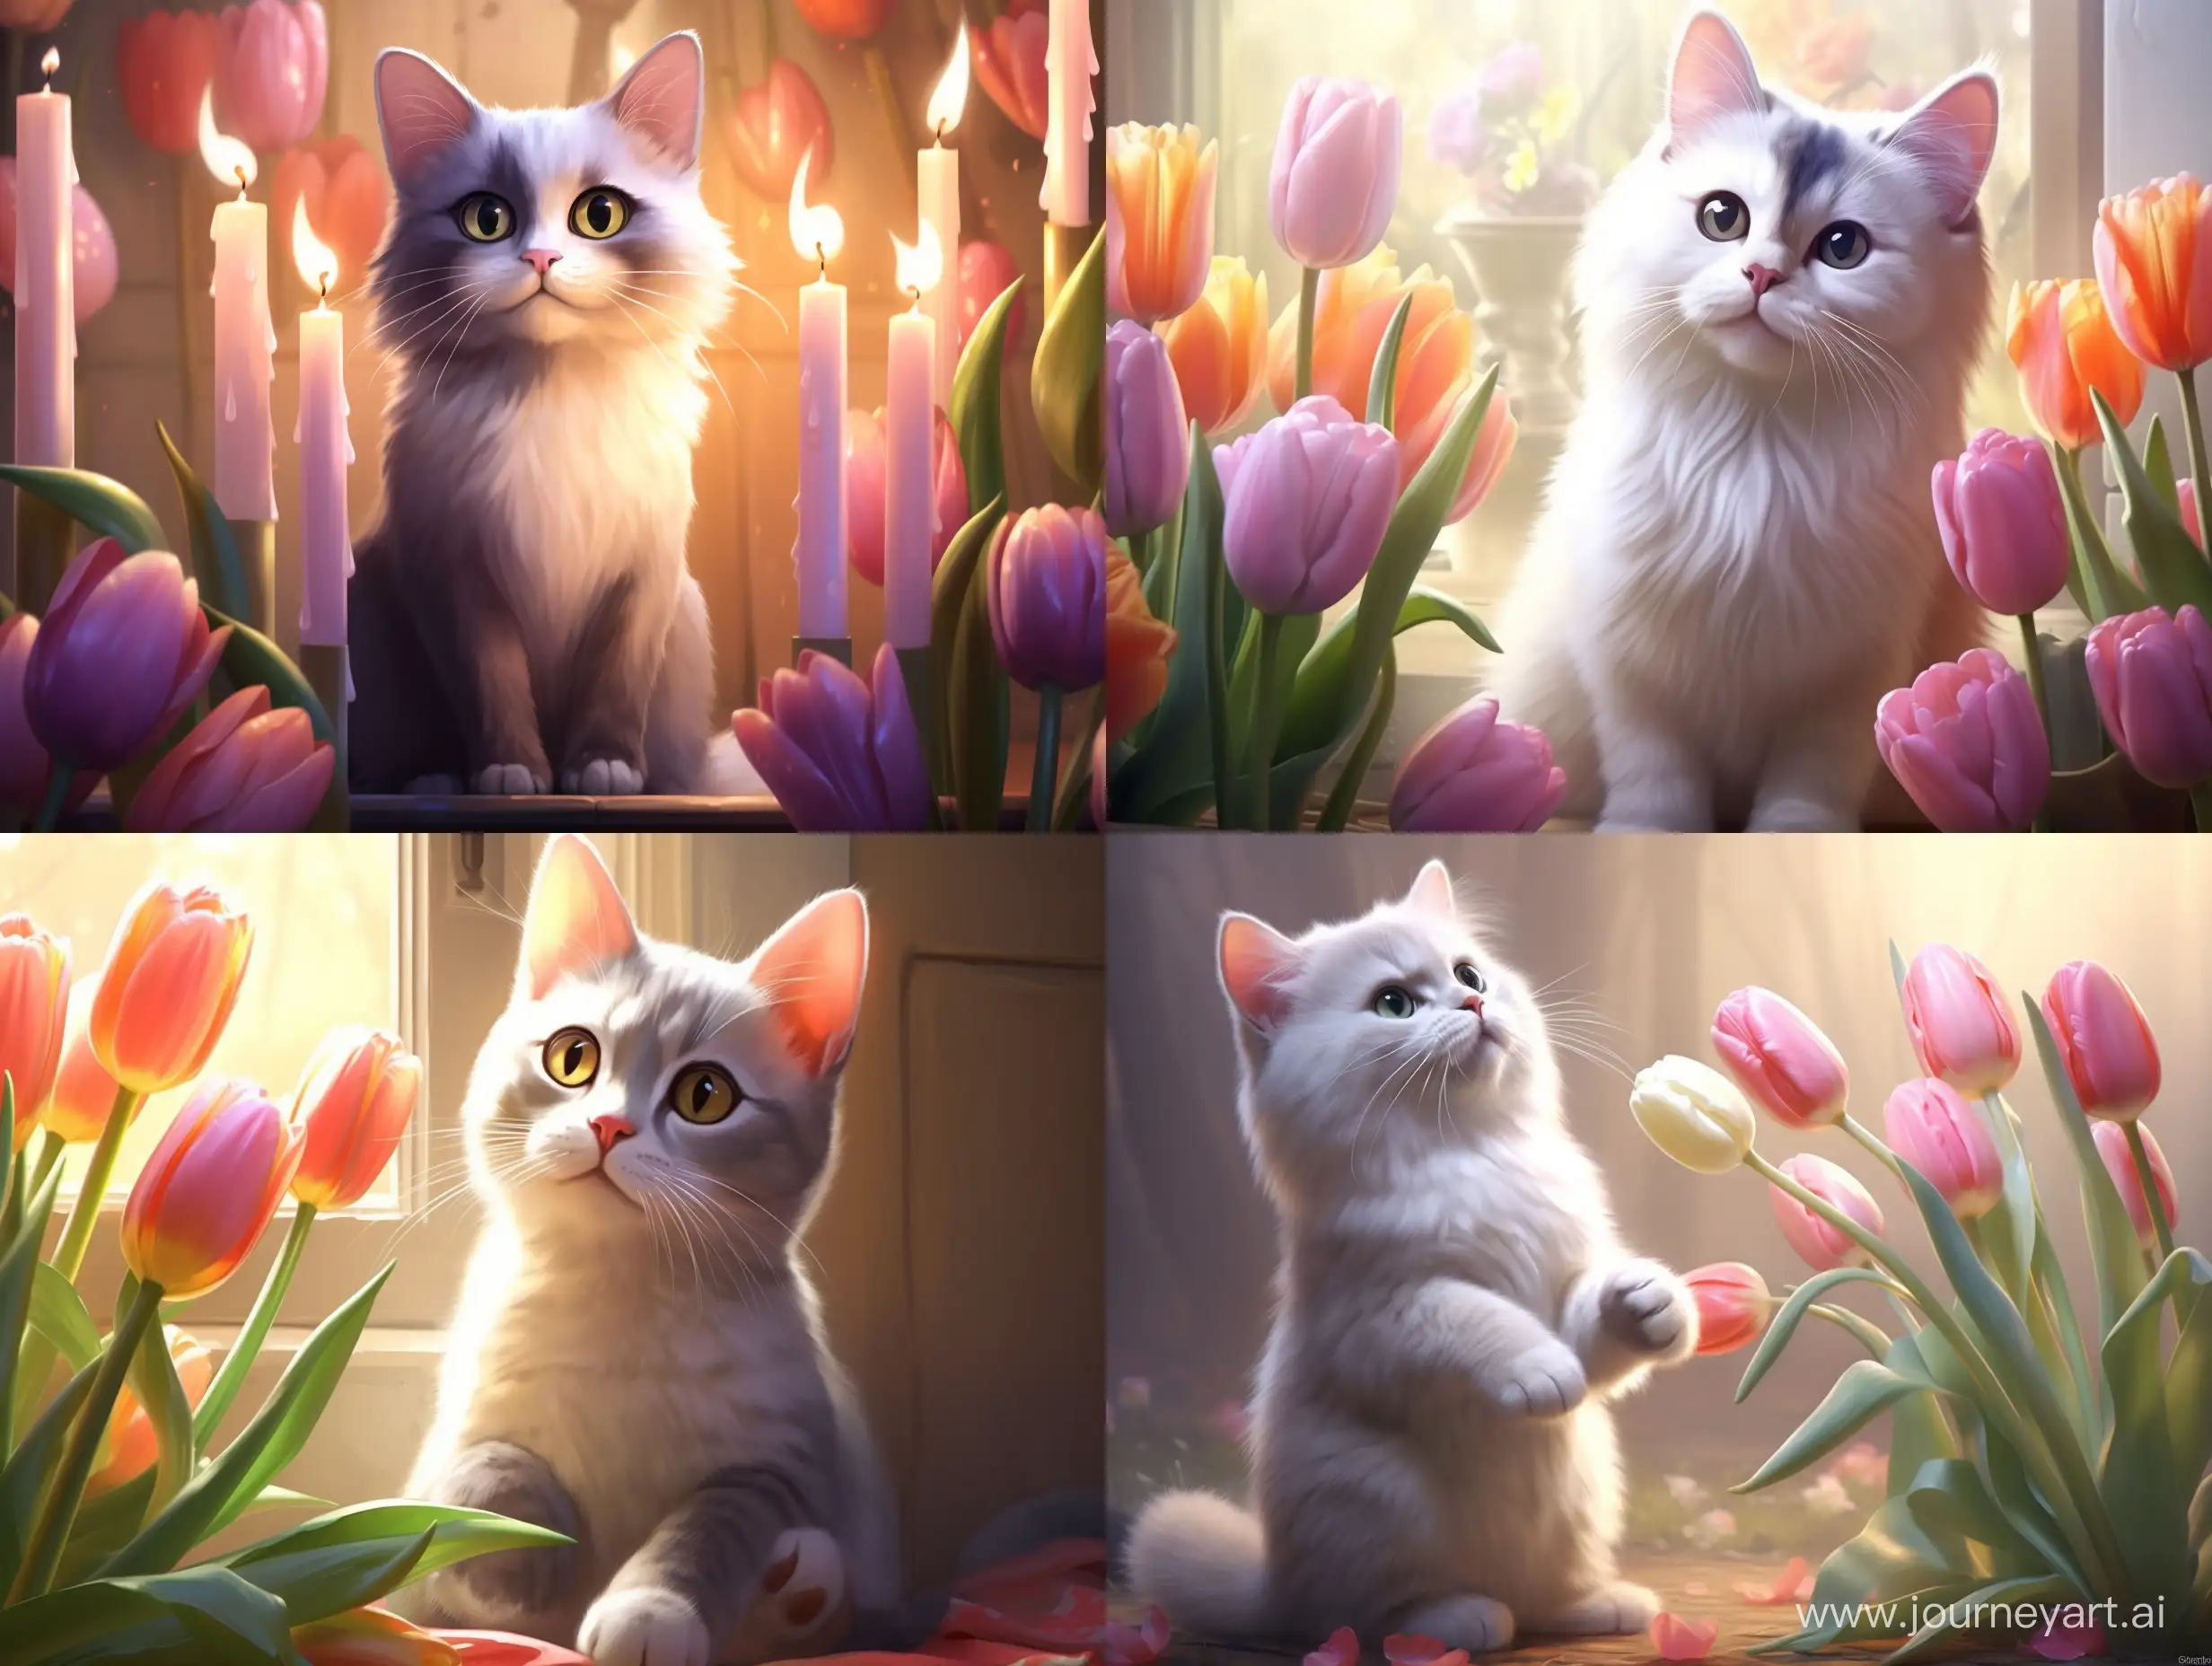 A Pixar-style cat with a bouquet of tulips. Pastel delicate tones.

